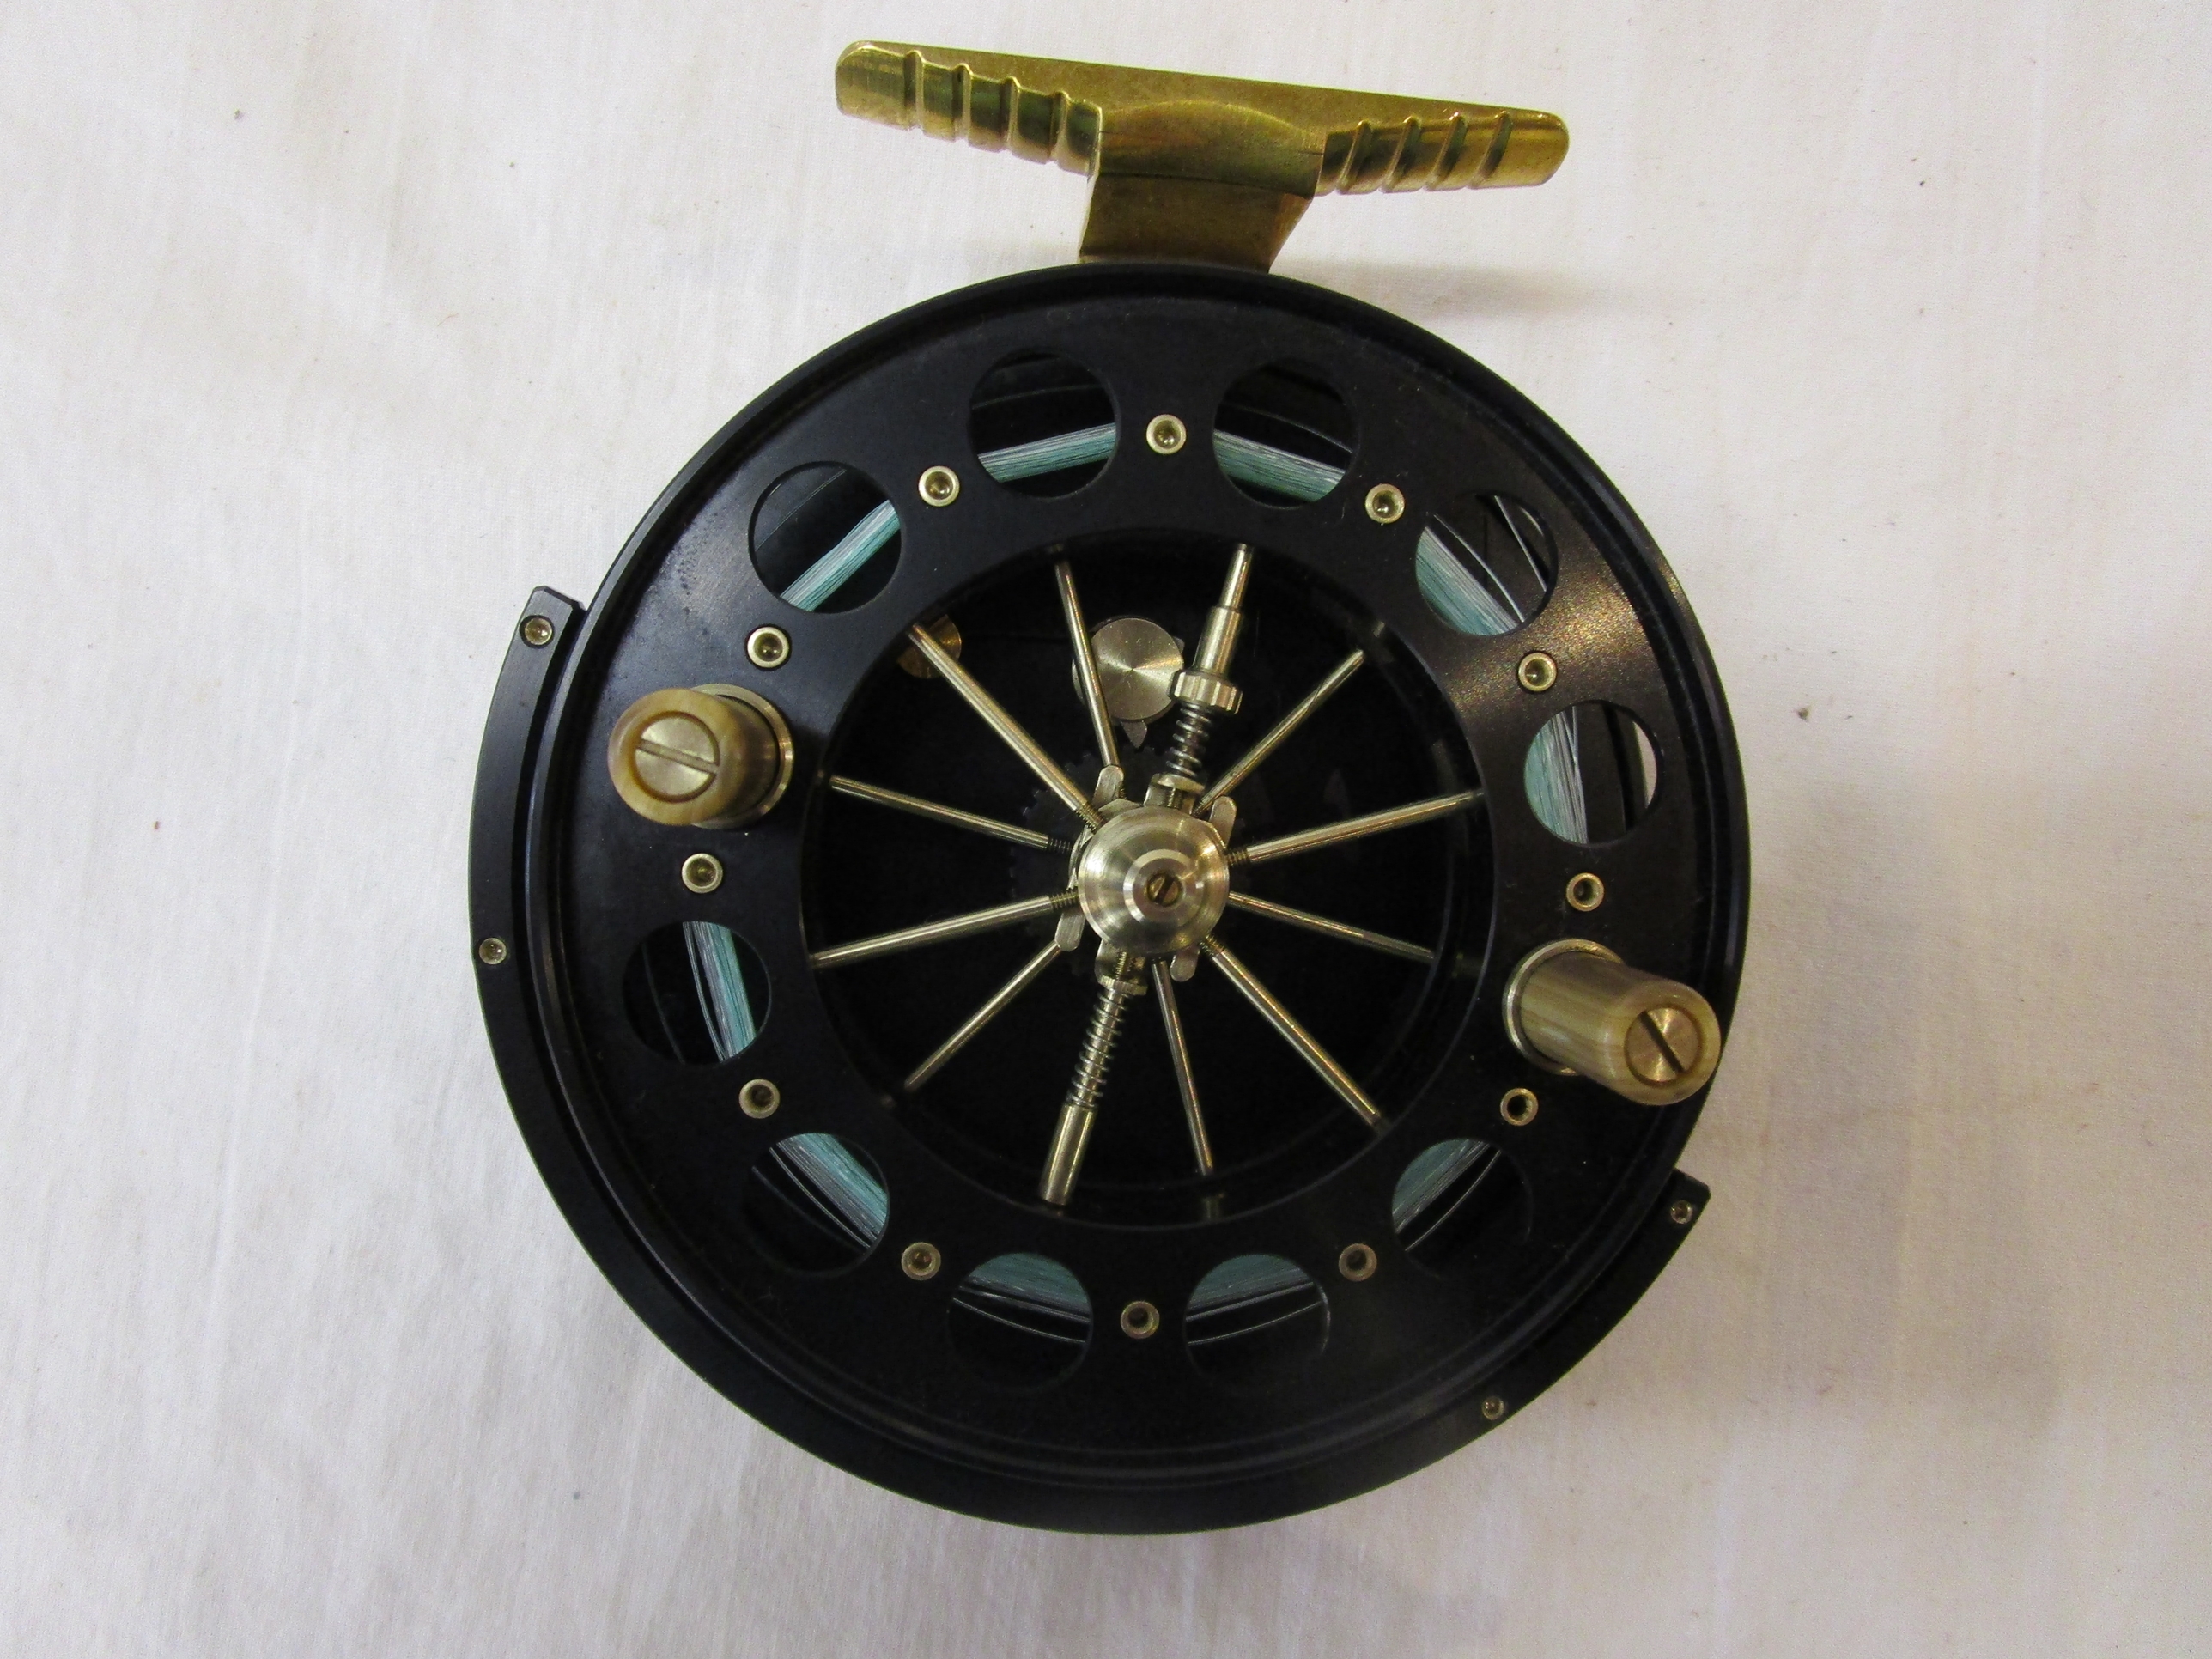 Richard Carter Traditional Angling handcrafted 'centre pin' reel with certificate of authenticity - Image 3 of 10